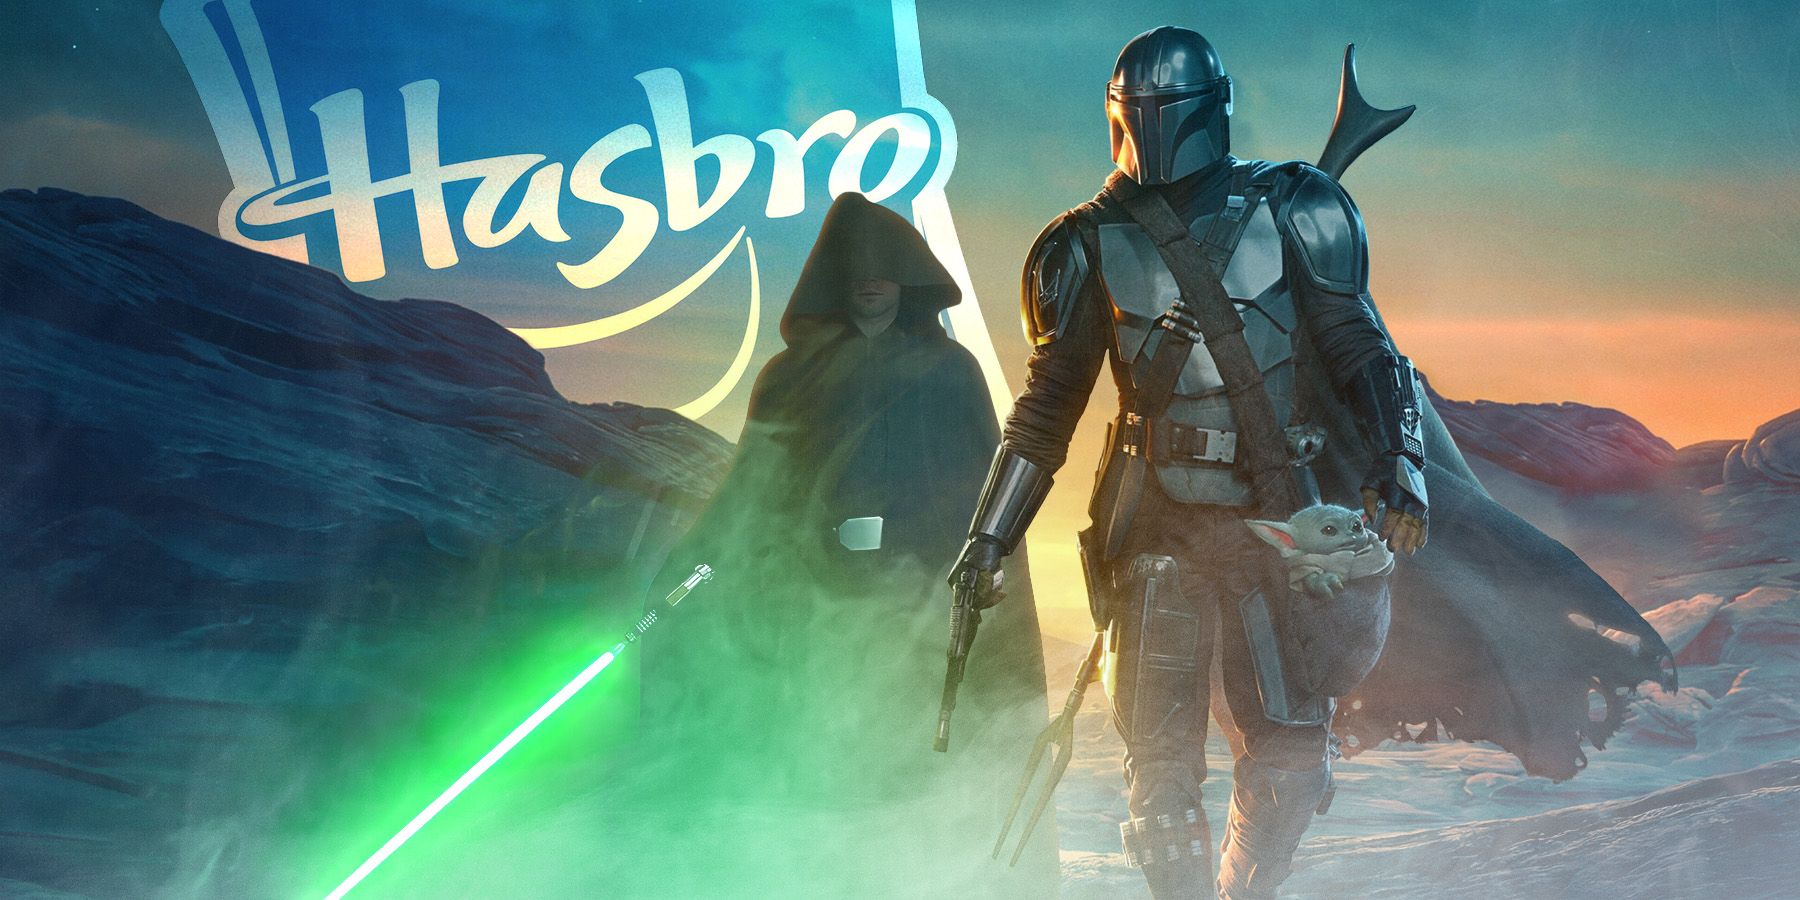 Hasbro Reveals New Collectible Lightsaber, Action Figures Based on The Mandalorian [EXCLUSIVE]